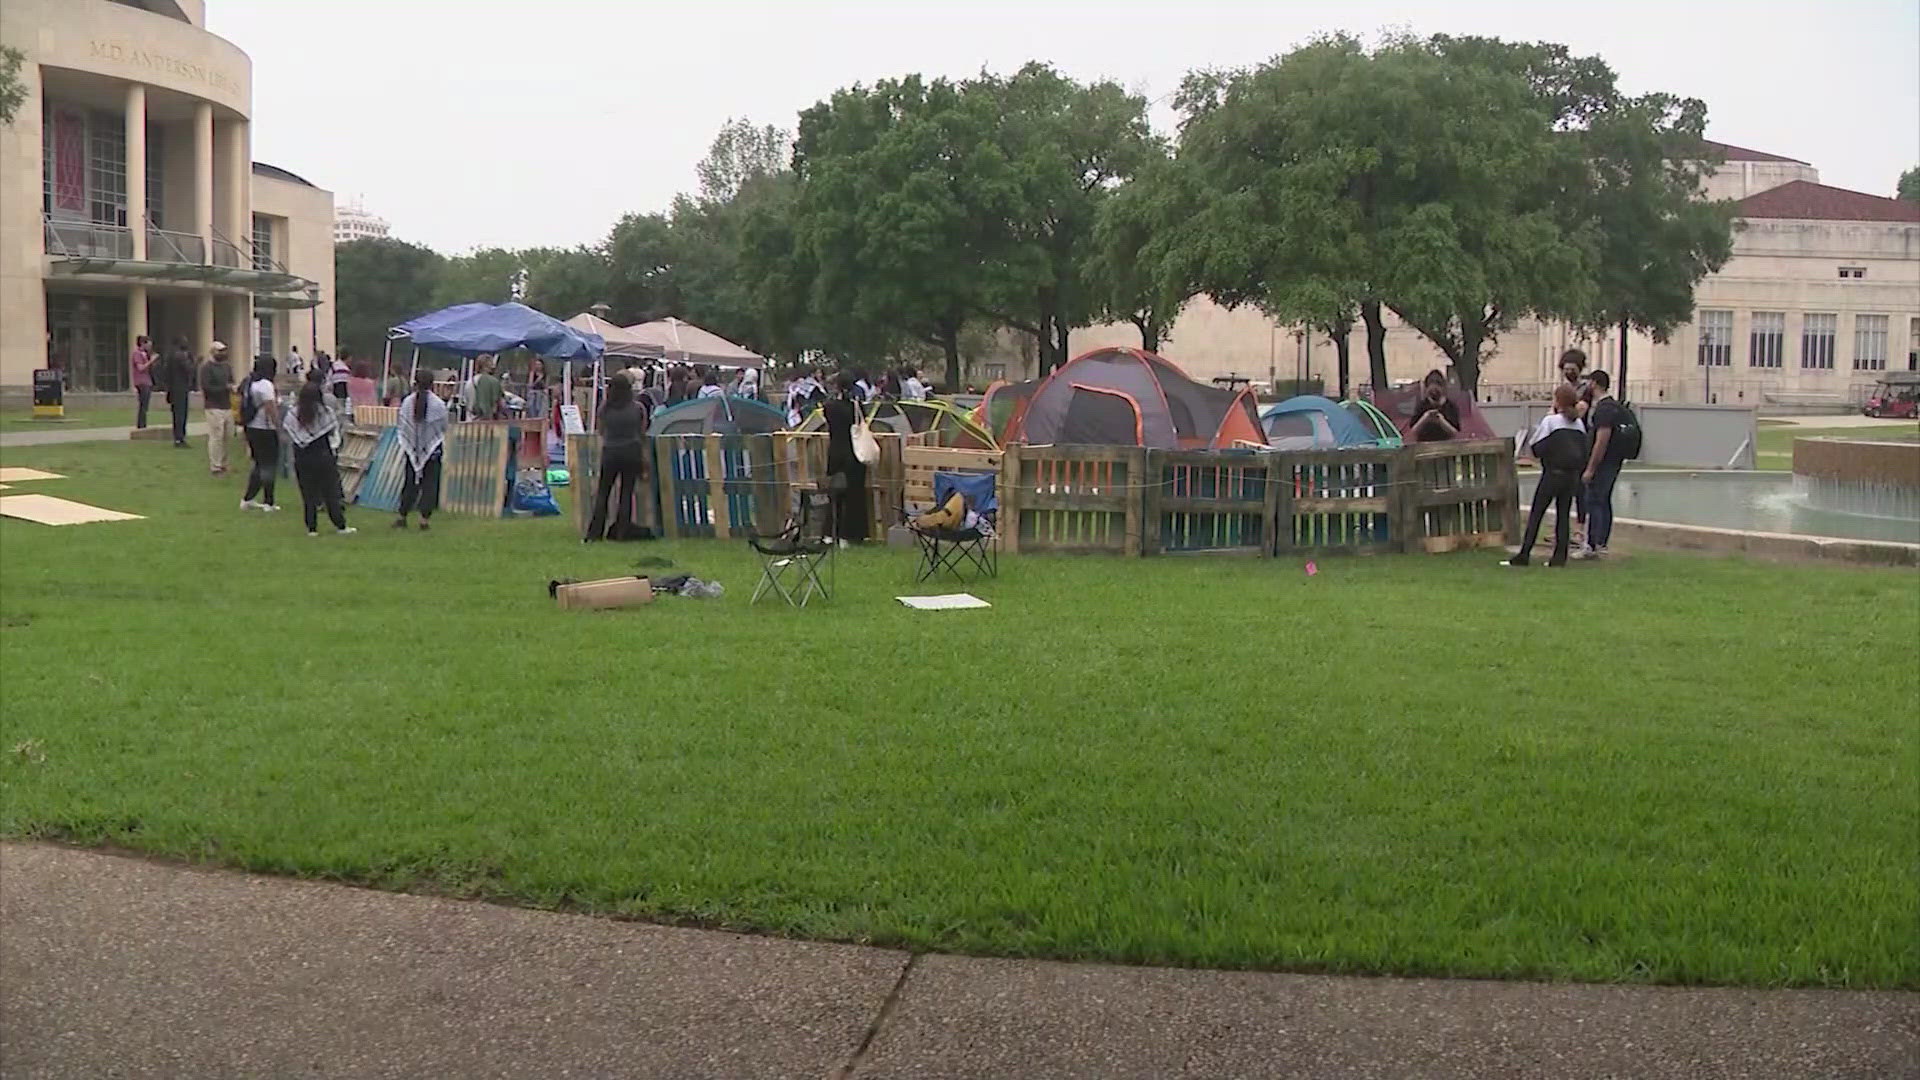 The university said the encampment was established by about 60 people overnight at Butler Plaza.